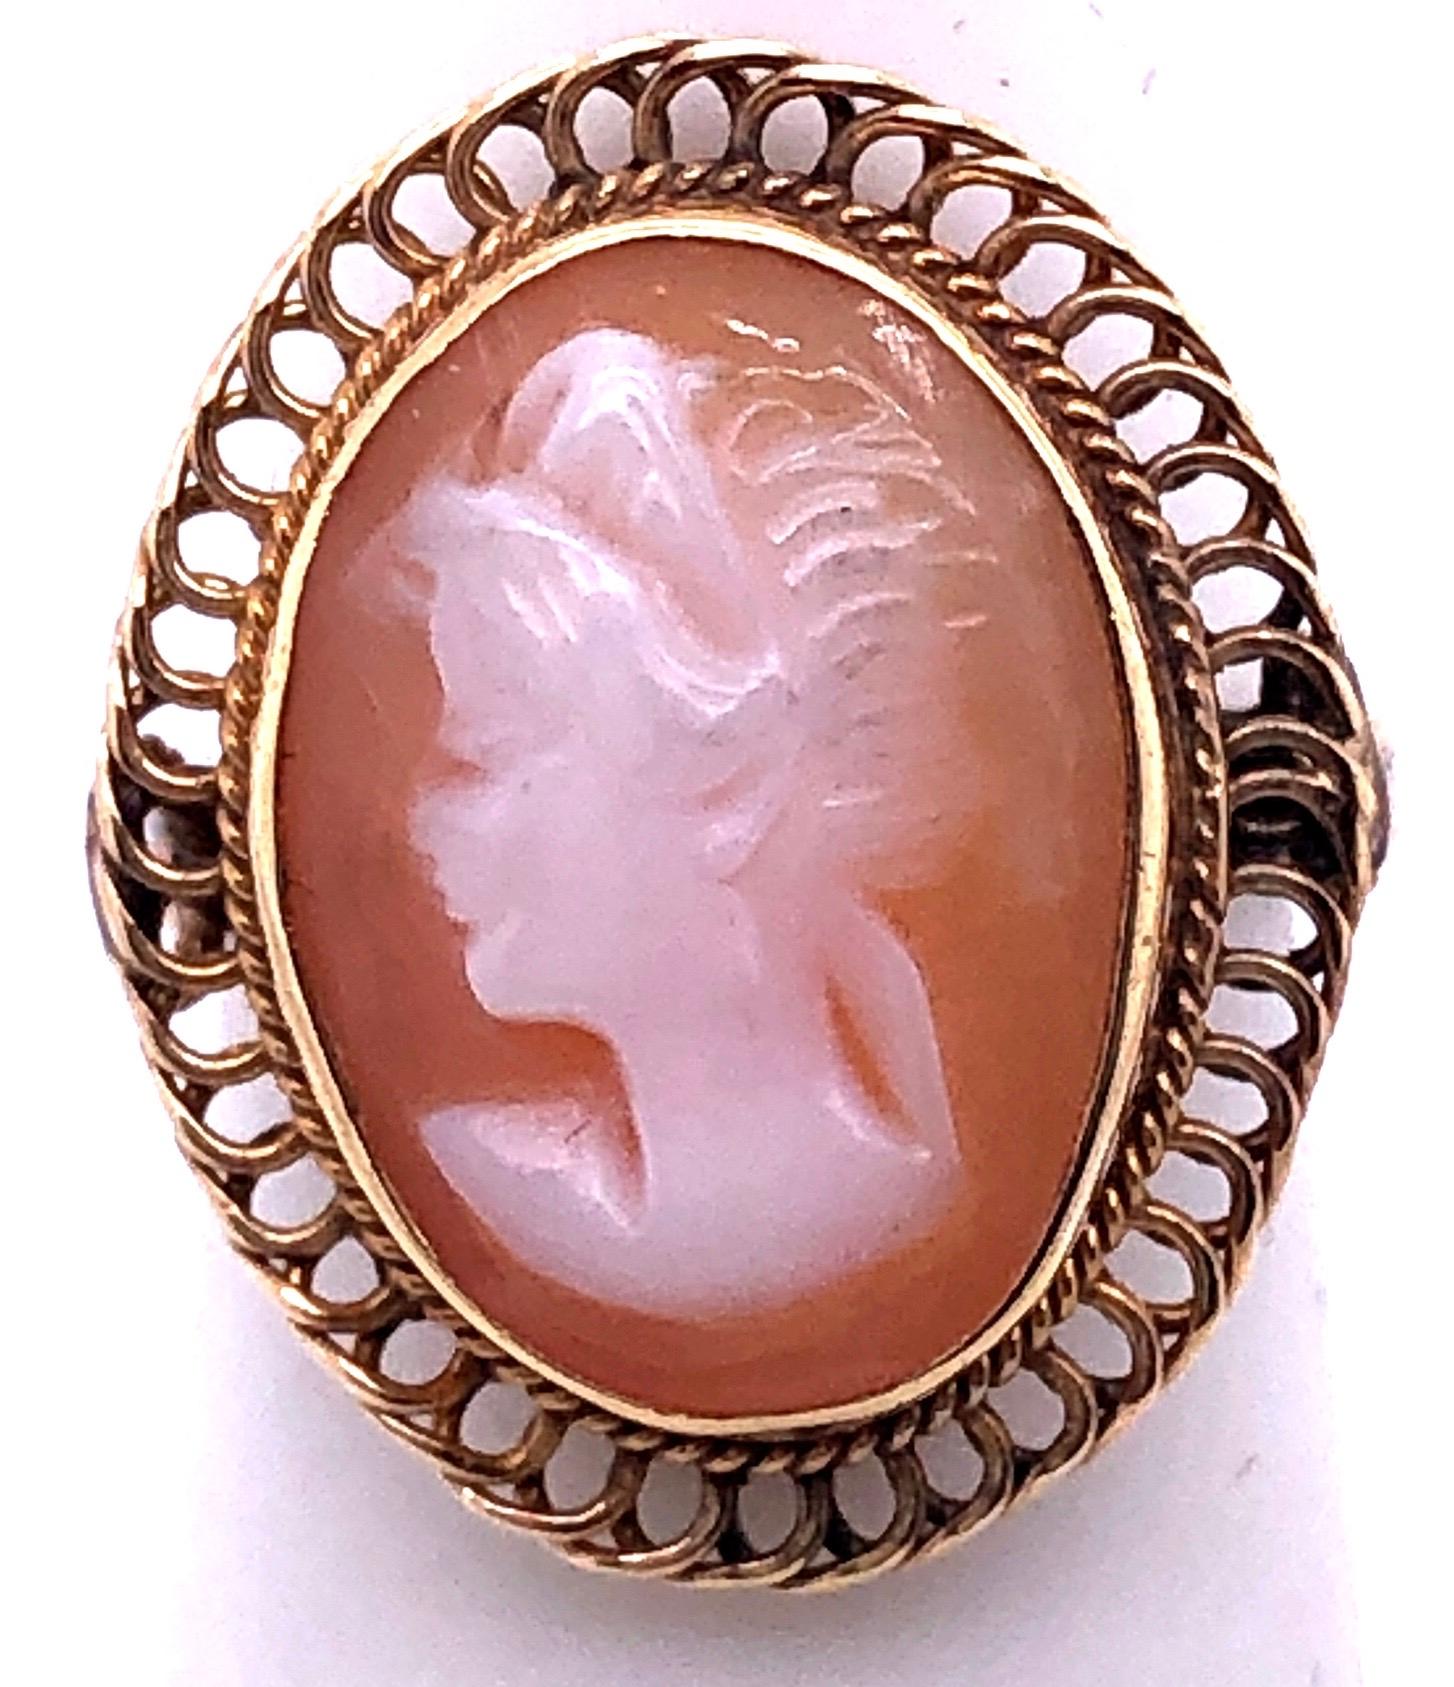 14 Karat Yellow Gold Swirl Framed Cameo Ring Size 6.5.
3 grams total weight.